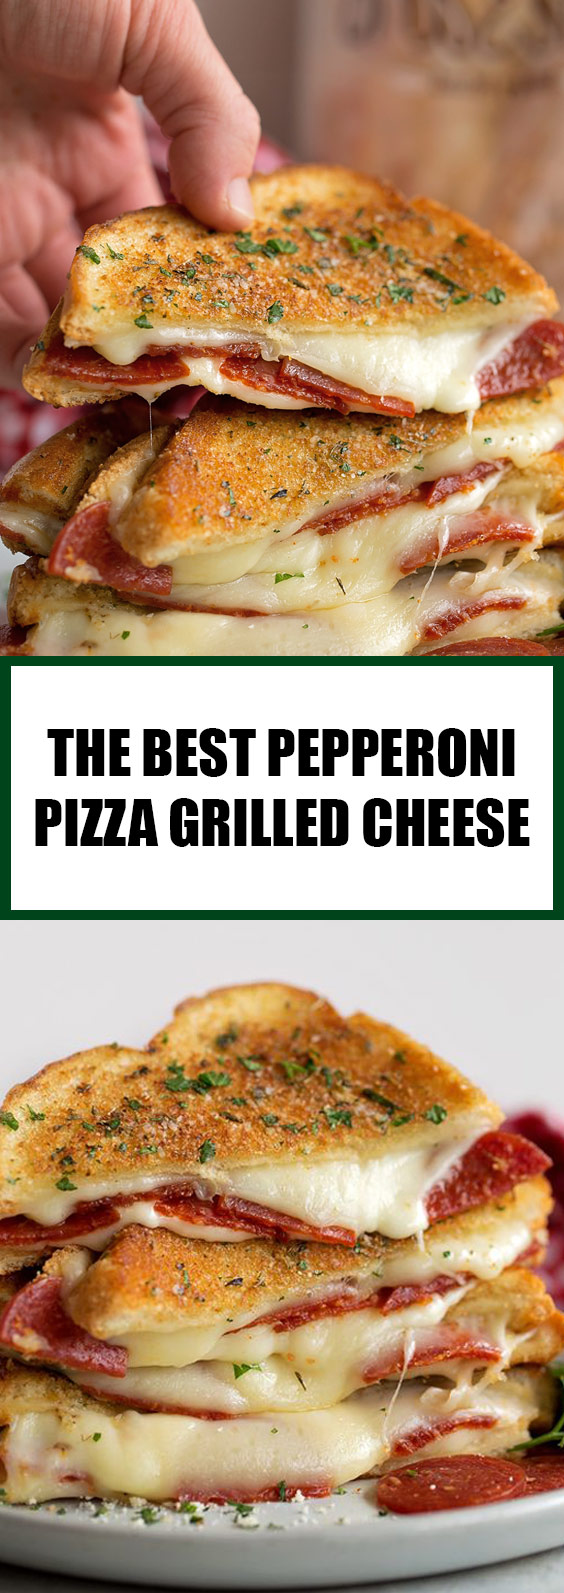 The Best Pepperoni Pizza Grilled Cheese #pizza #pepperoni - FOOD RECIPES